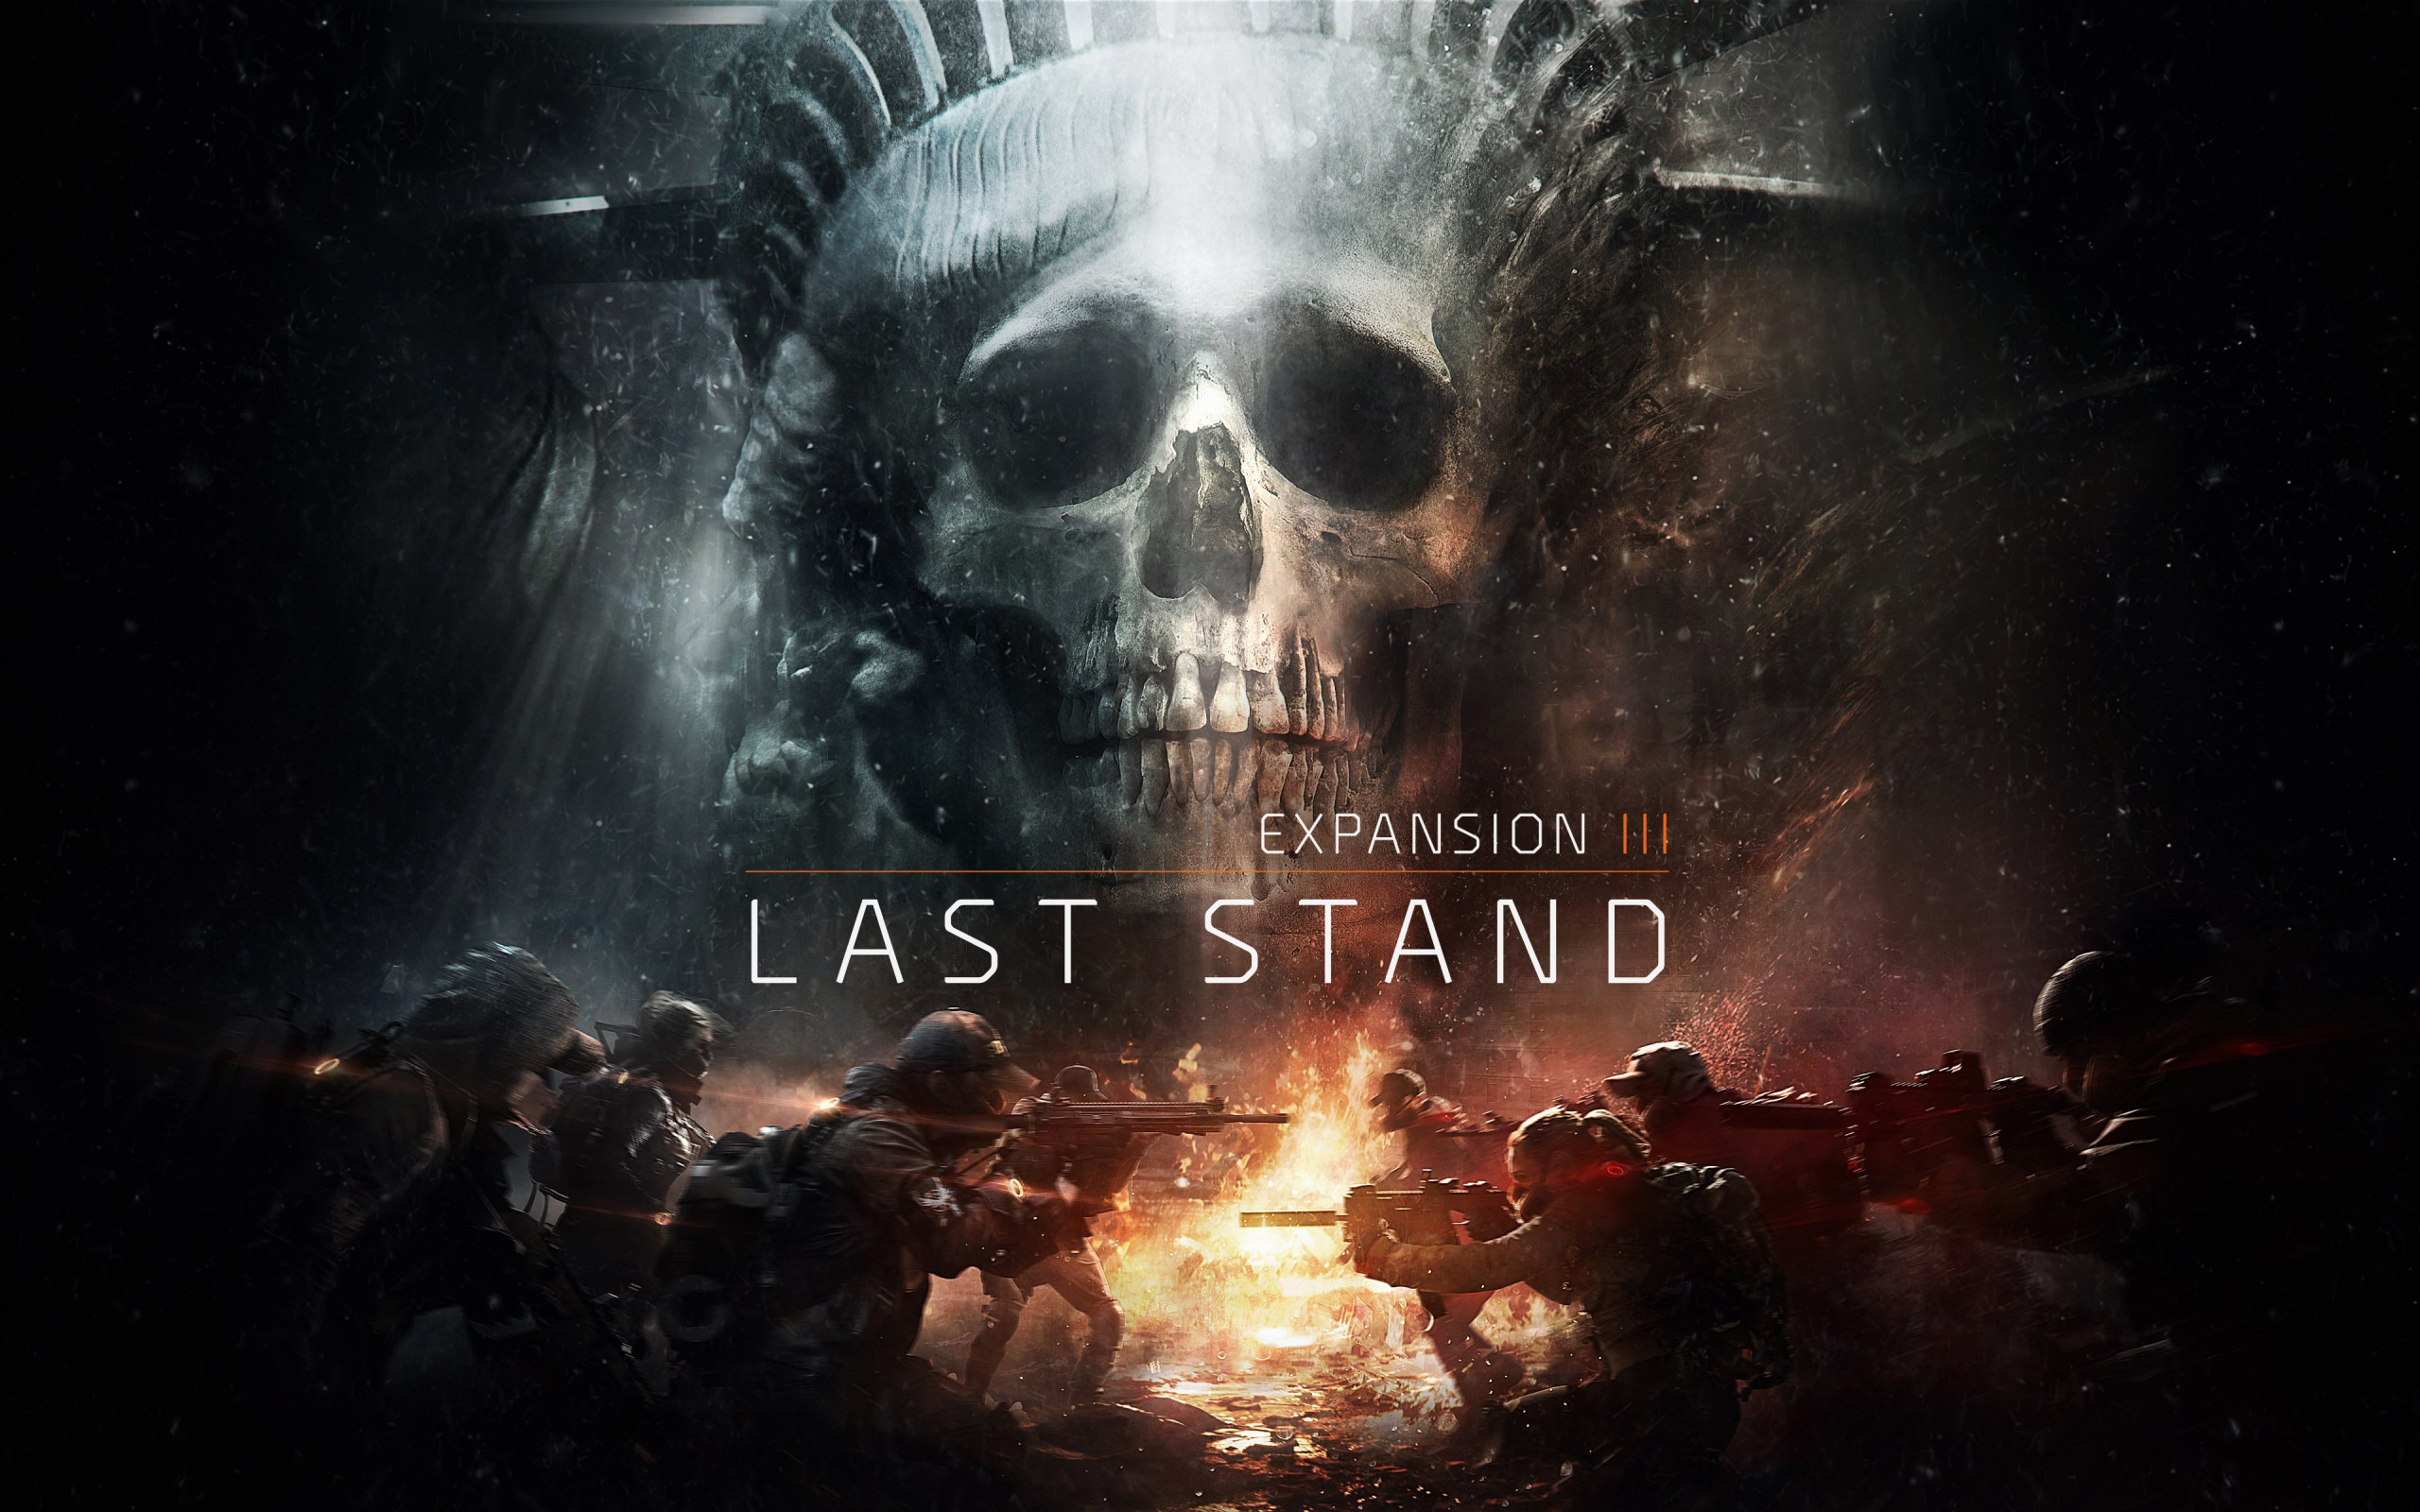 The Division Last Stand Expansion 3 wallpaper 2560x1600